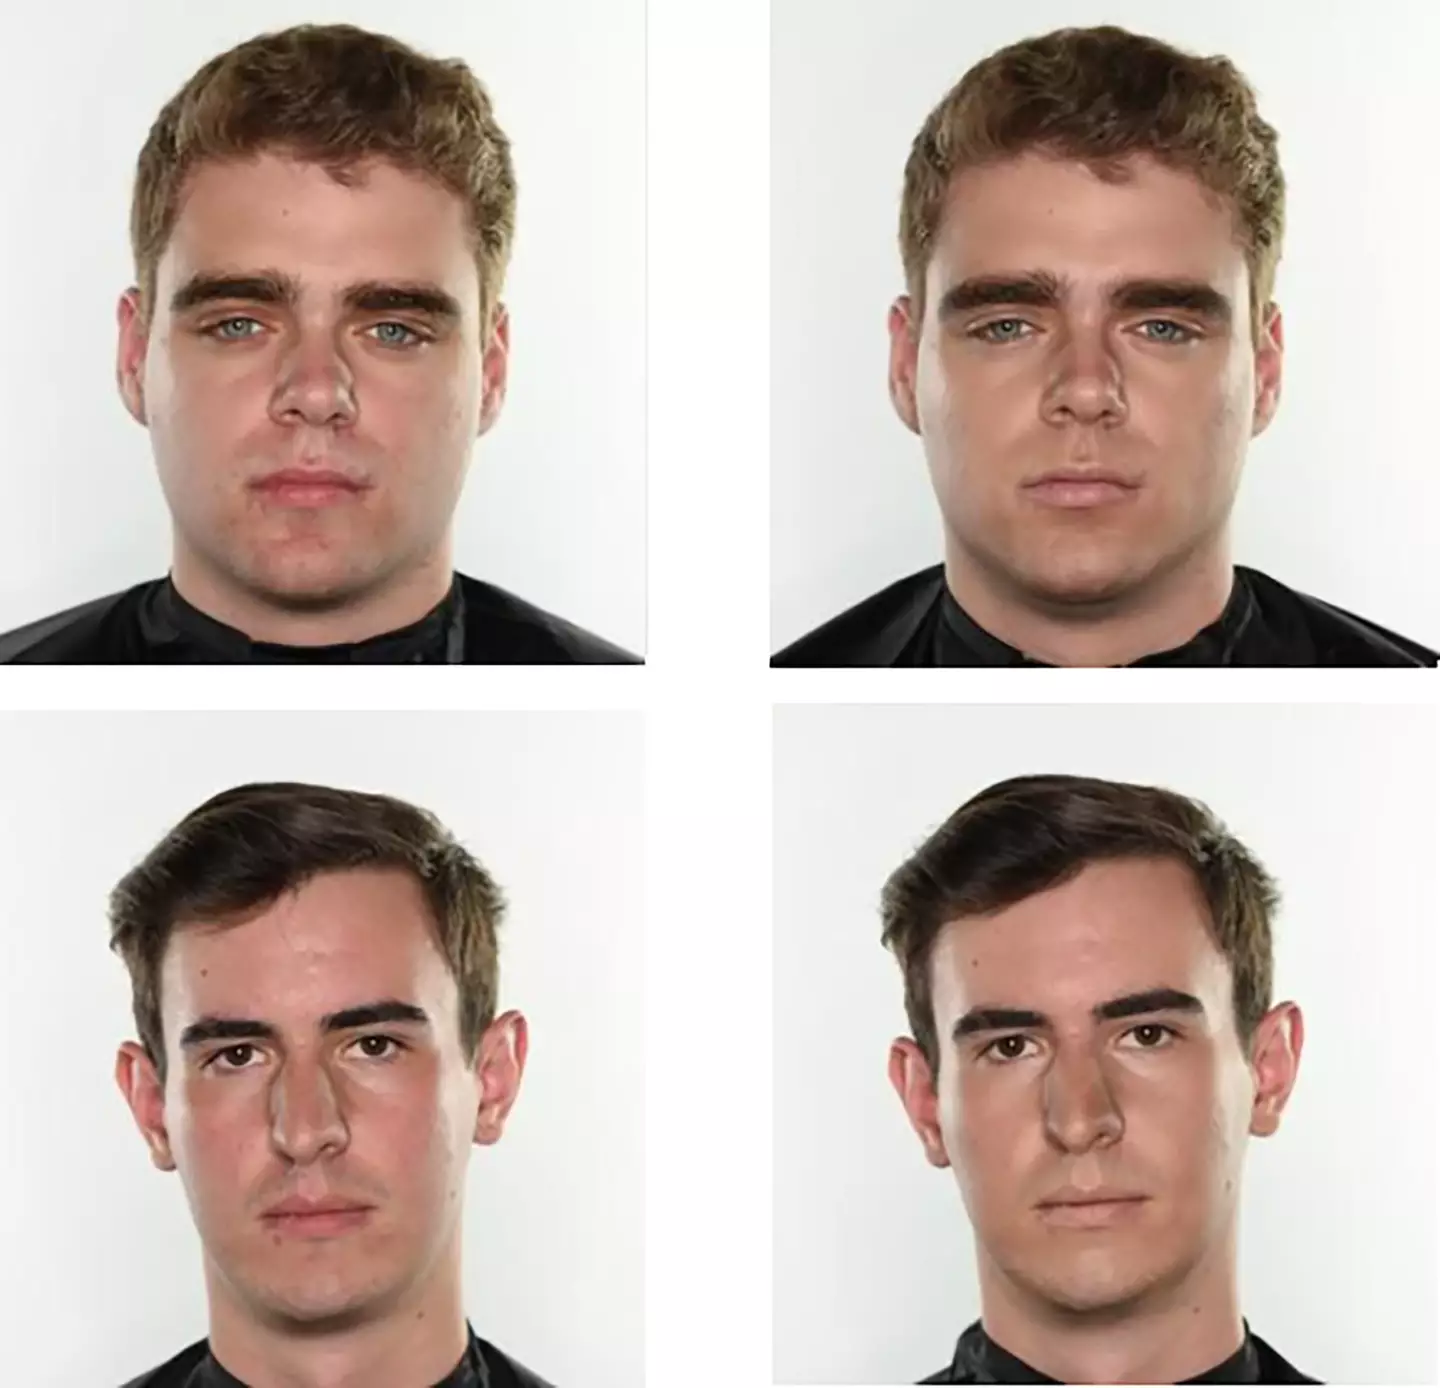 The study took two photographs of 20 men - one with and one without make up.